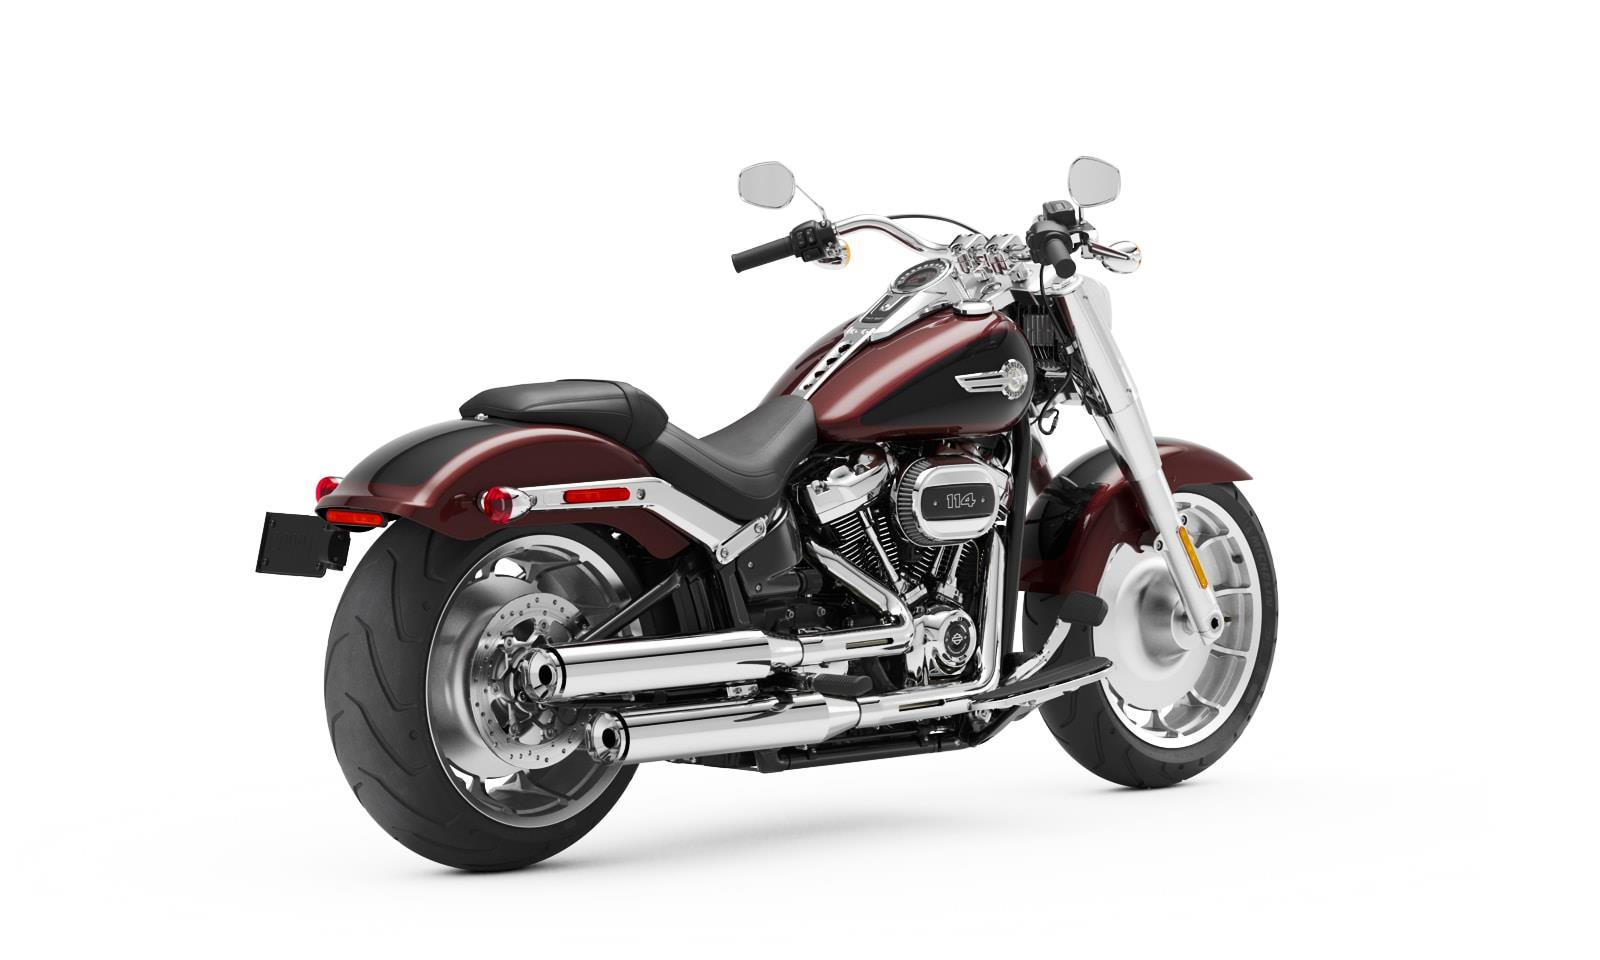 2023 Harley-Davidson Fat Boy Price, Specs, Top Speed & Mileage in India